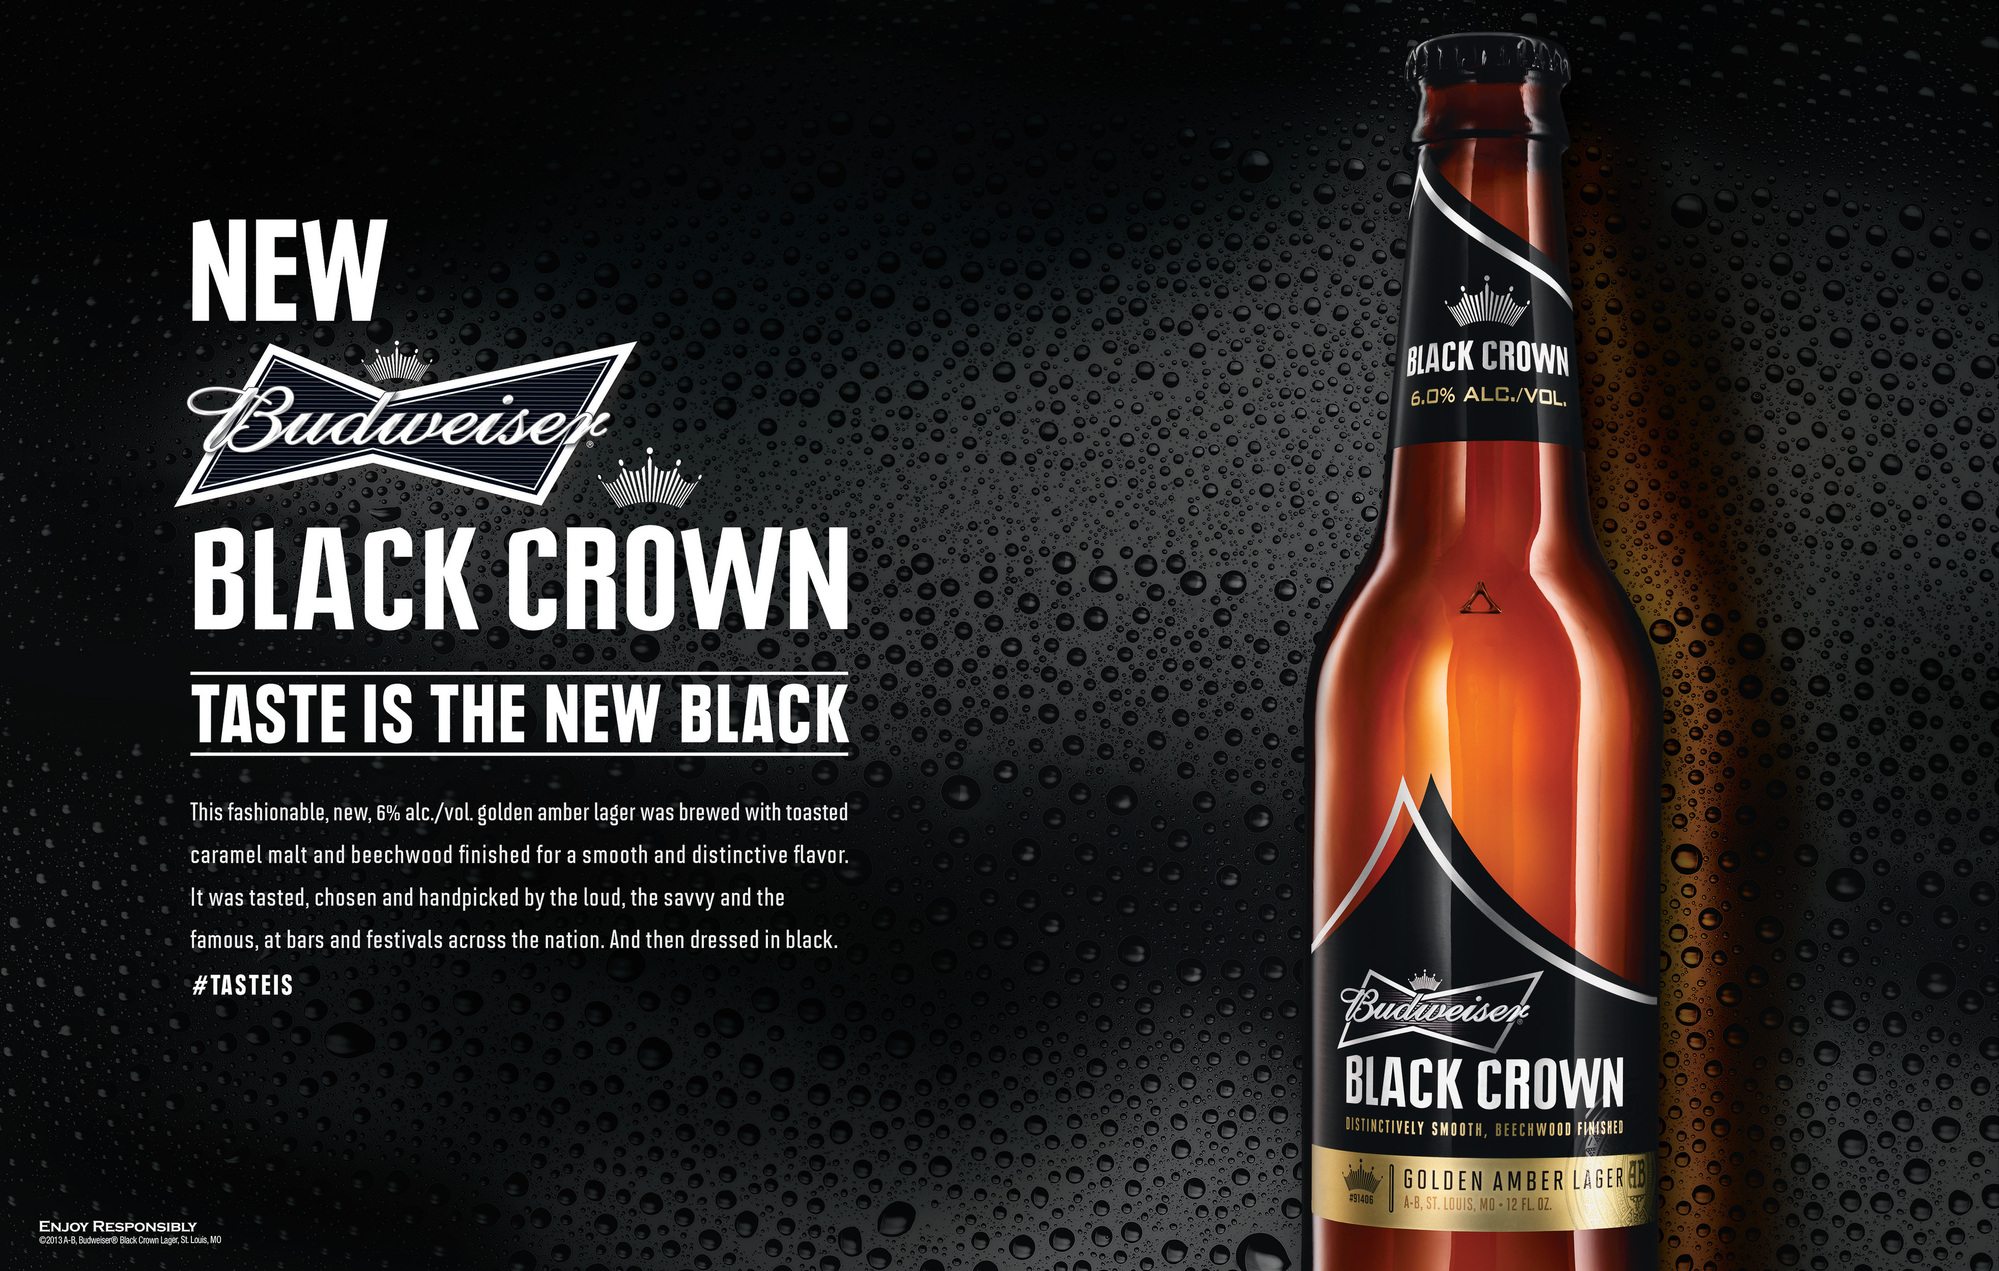 Budweiser - Black Crown tear sheet. Beverage beer product and advertising photography by Timothy Hogan in Los Angeles